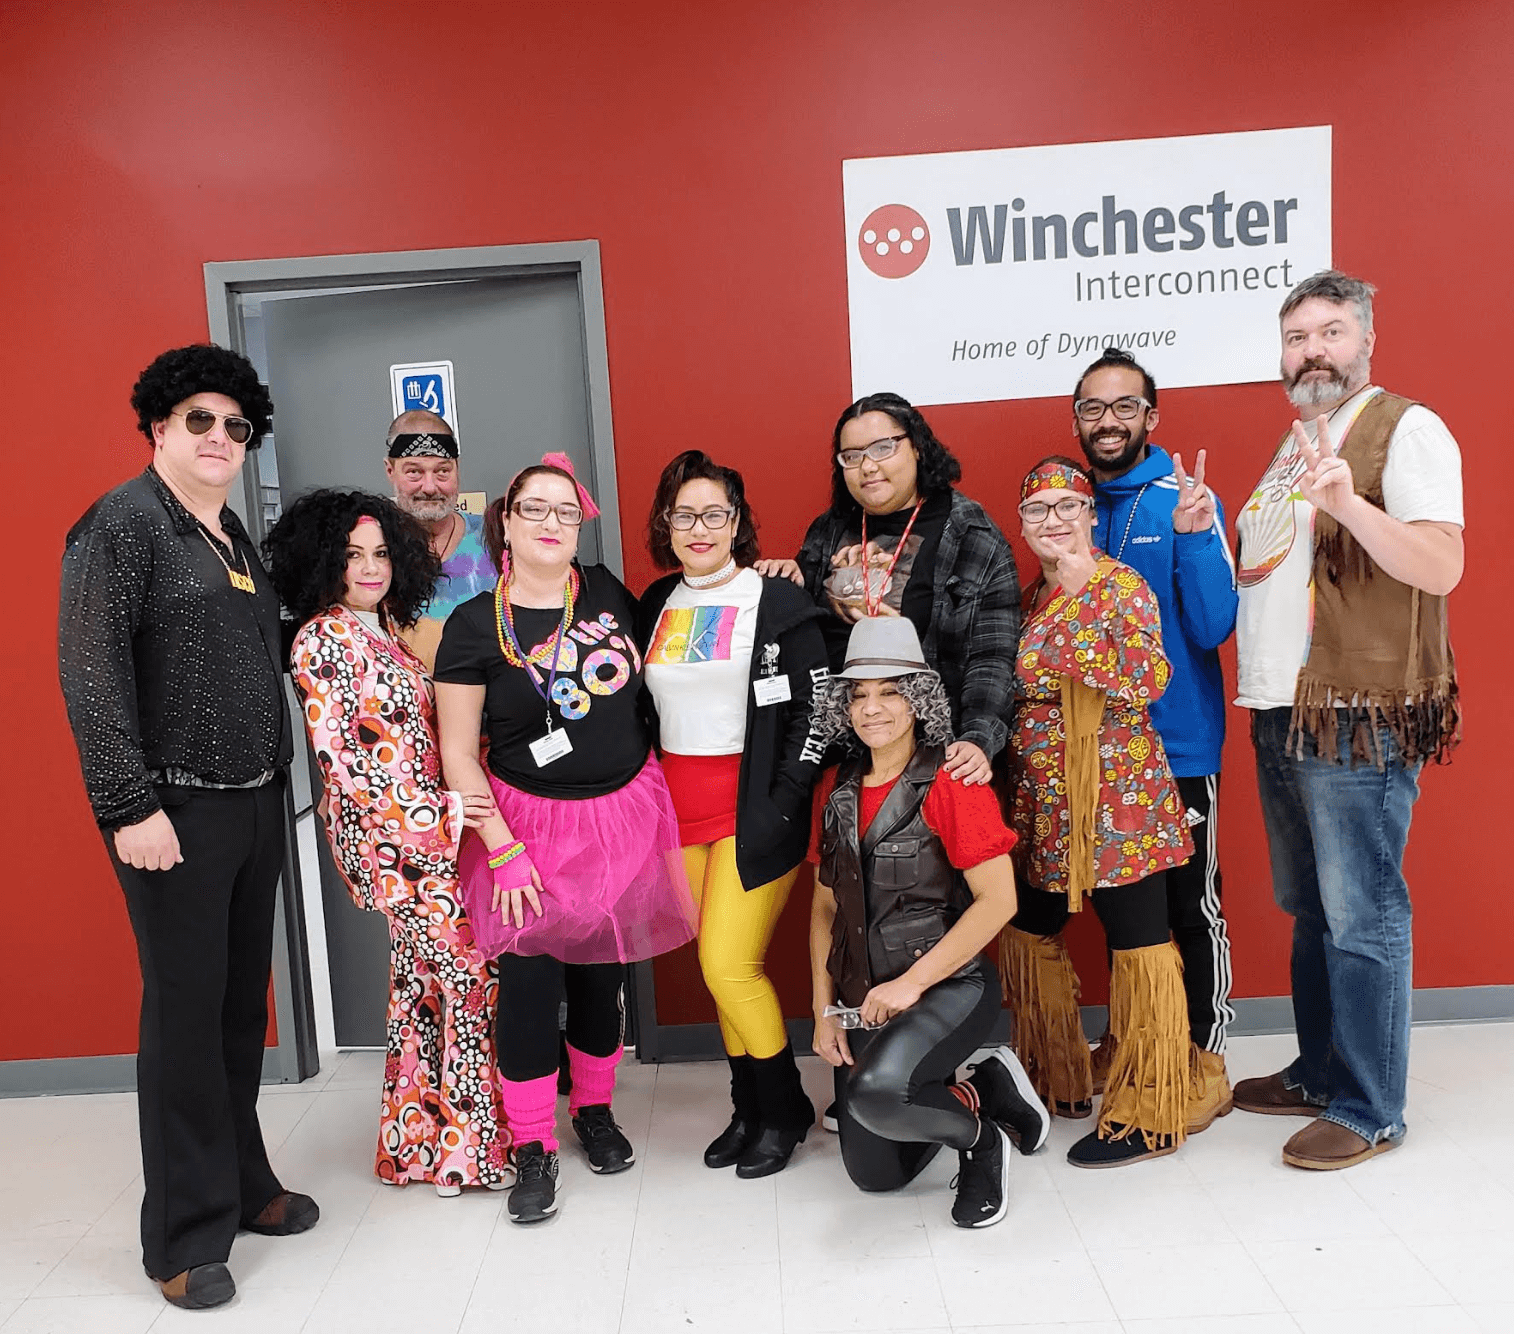 Haverhill One Winchester 70's dress up day